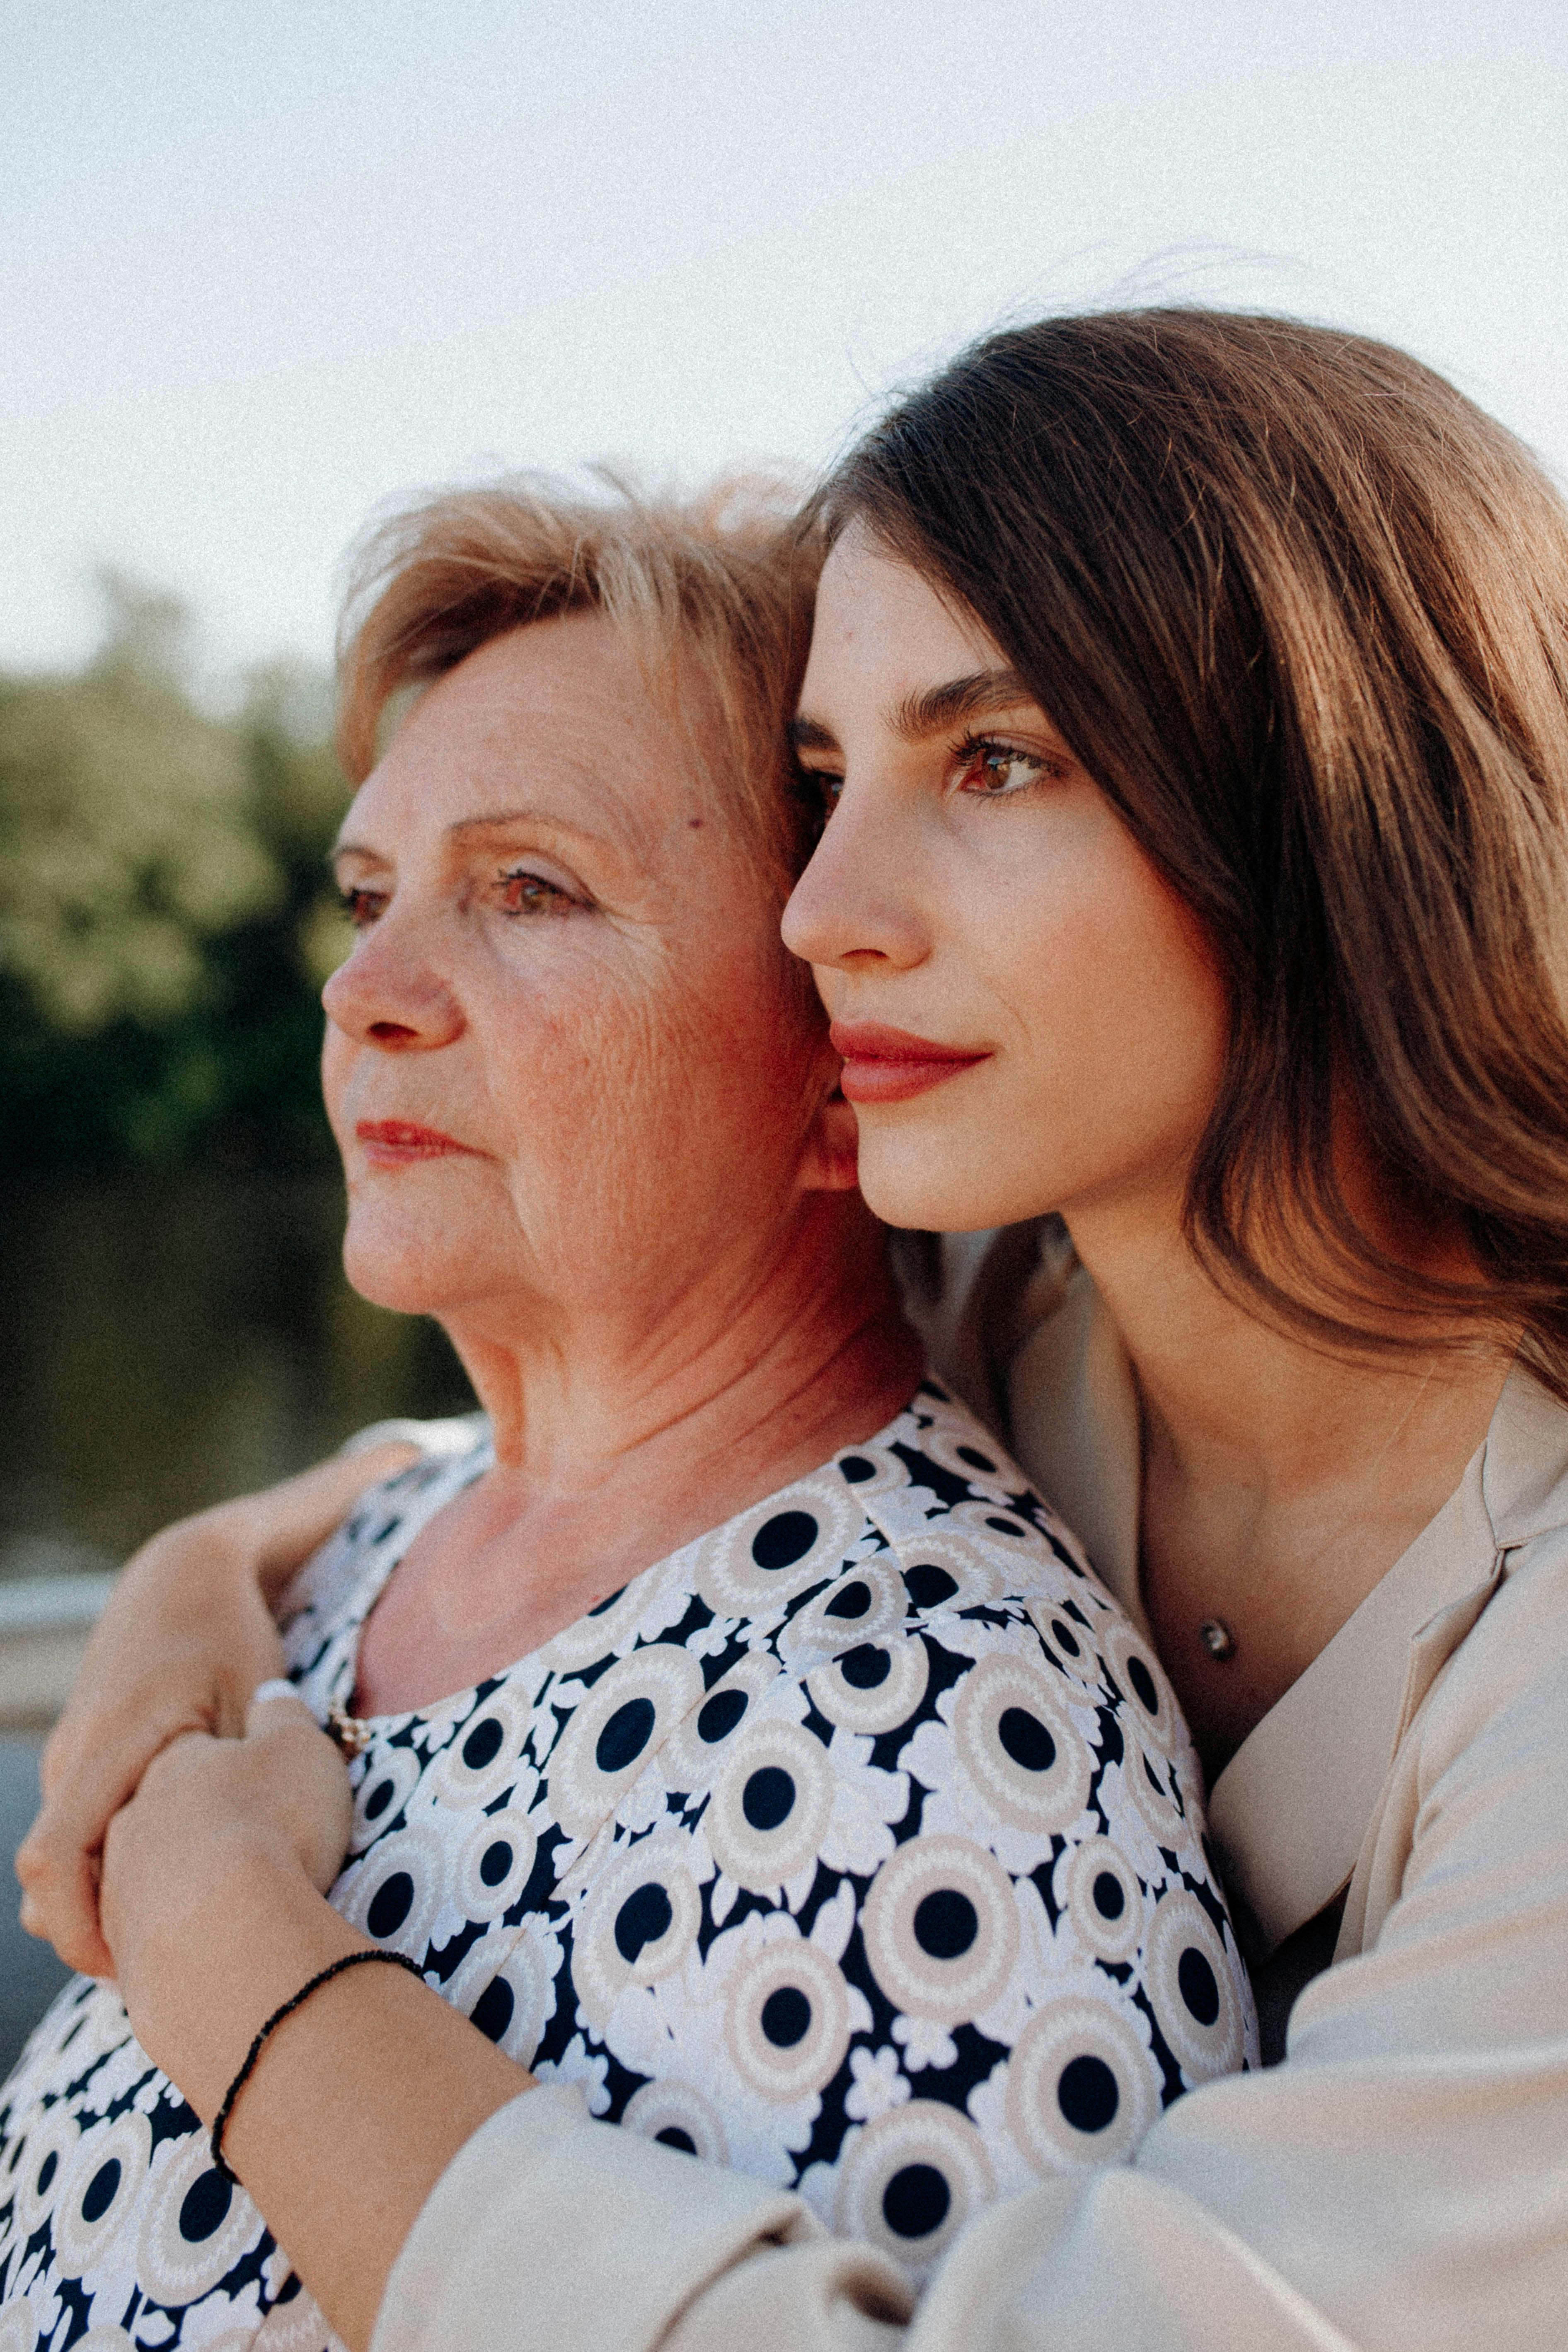 Woman and her daughter contemplating | Source: Pexels